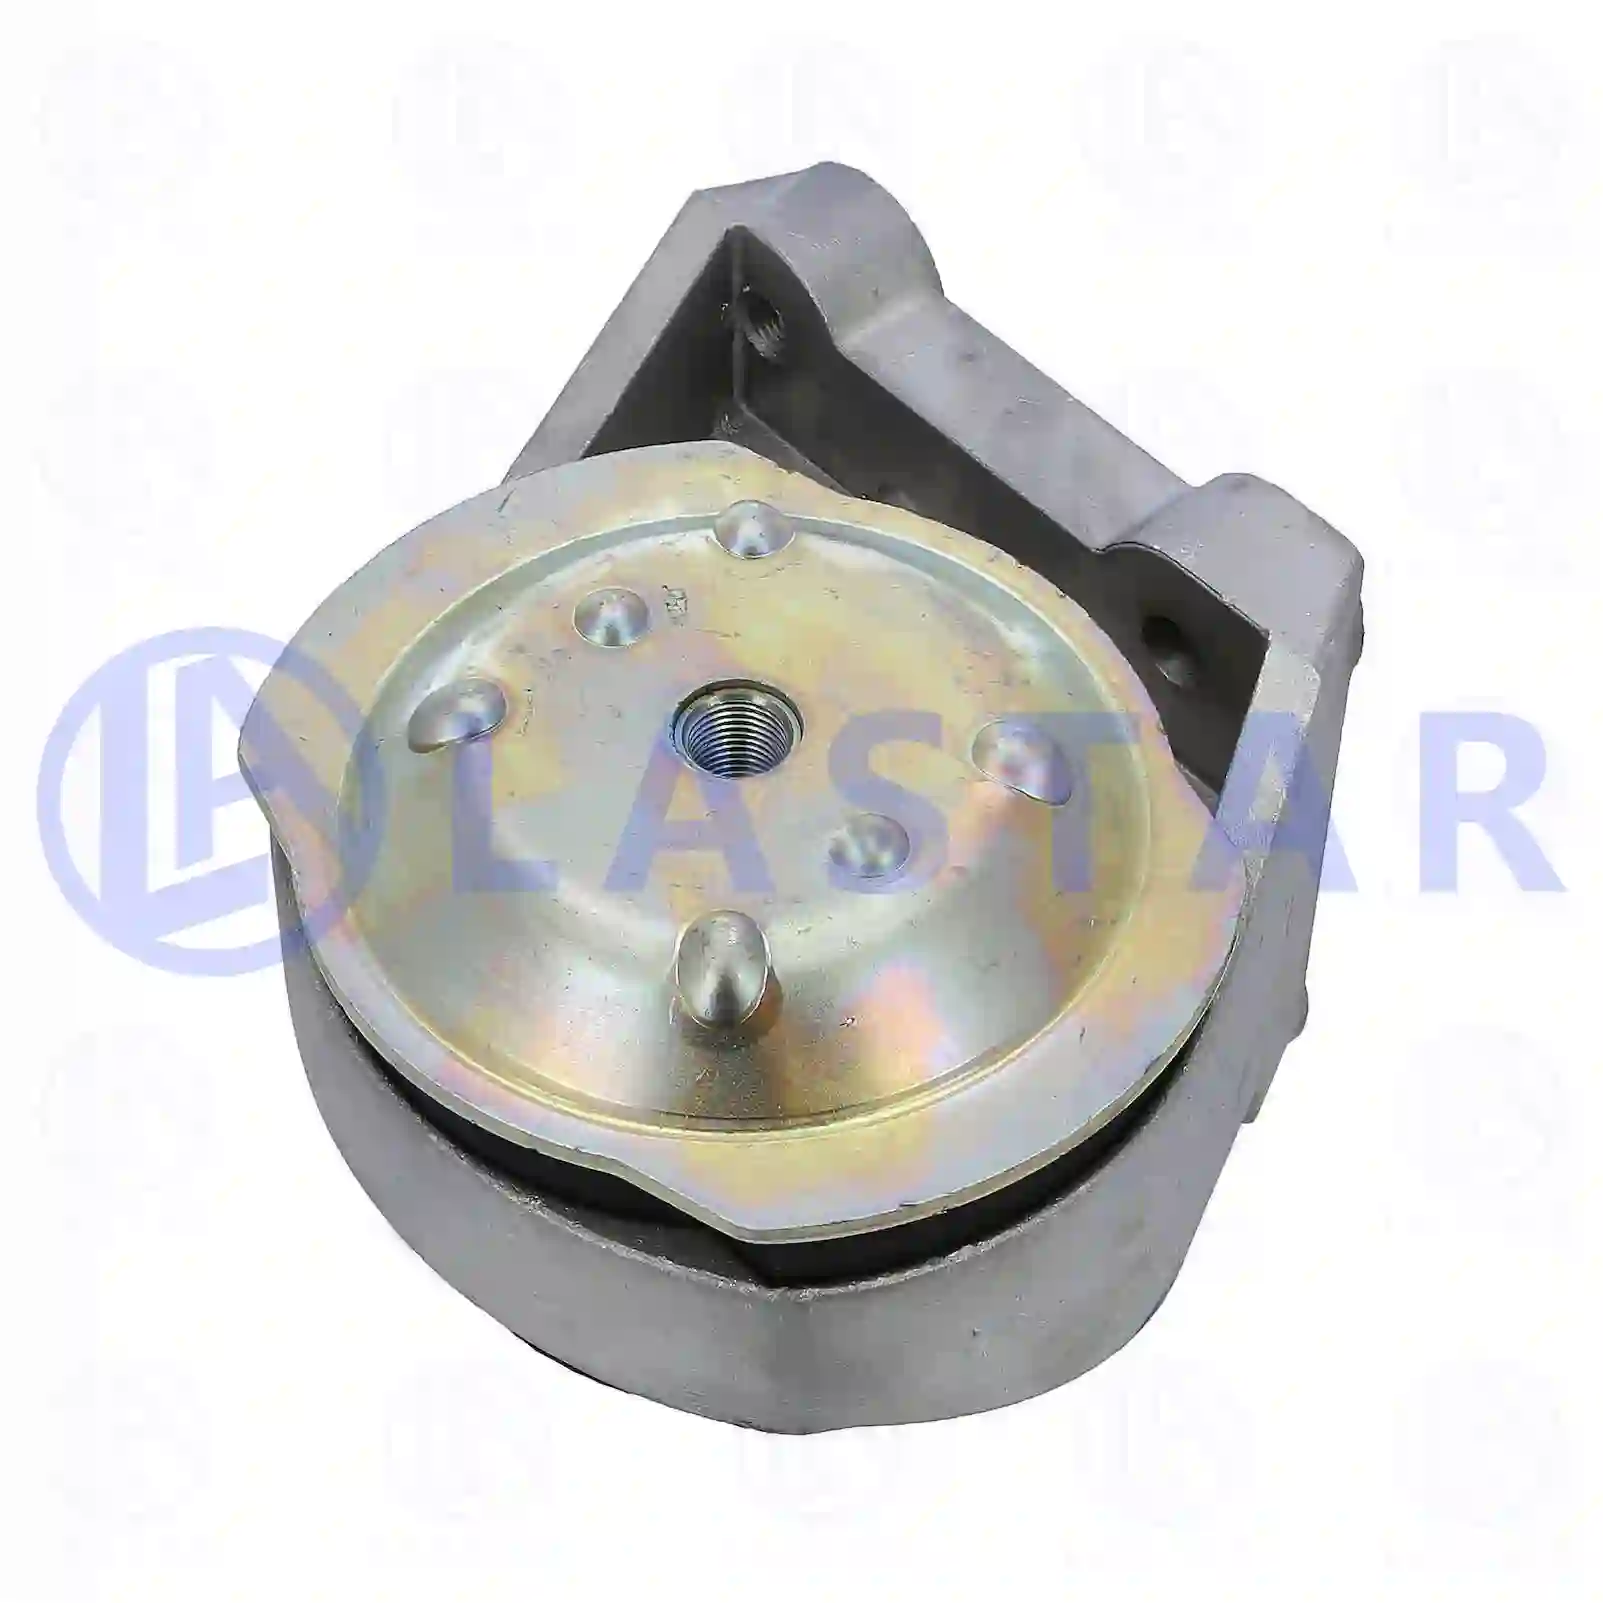 Engine mounting, front, right, 77702437, 9402400917, , , ||  77702437 Lastar Spare Part | Truck Spare Parts, Auotomotive Spare Parts Engine mounting, front, right, 77702437, 9402400917, , , ||  77702437 Lastar Spare Part | Truck Spare Parts, Auotomotive Spare Parts